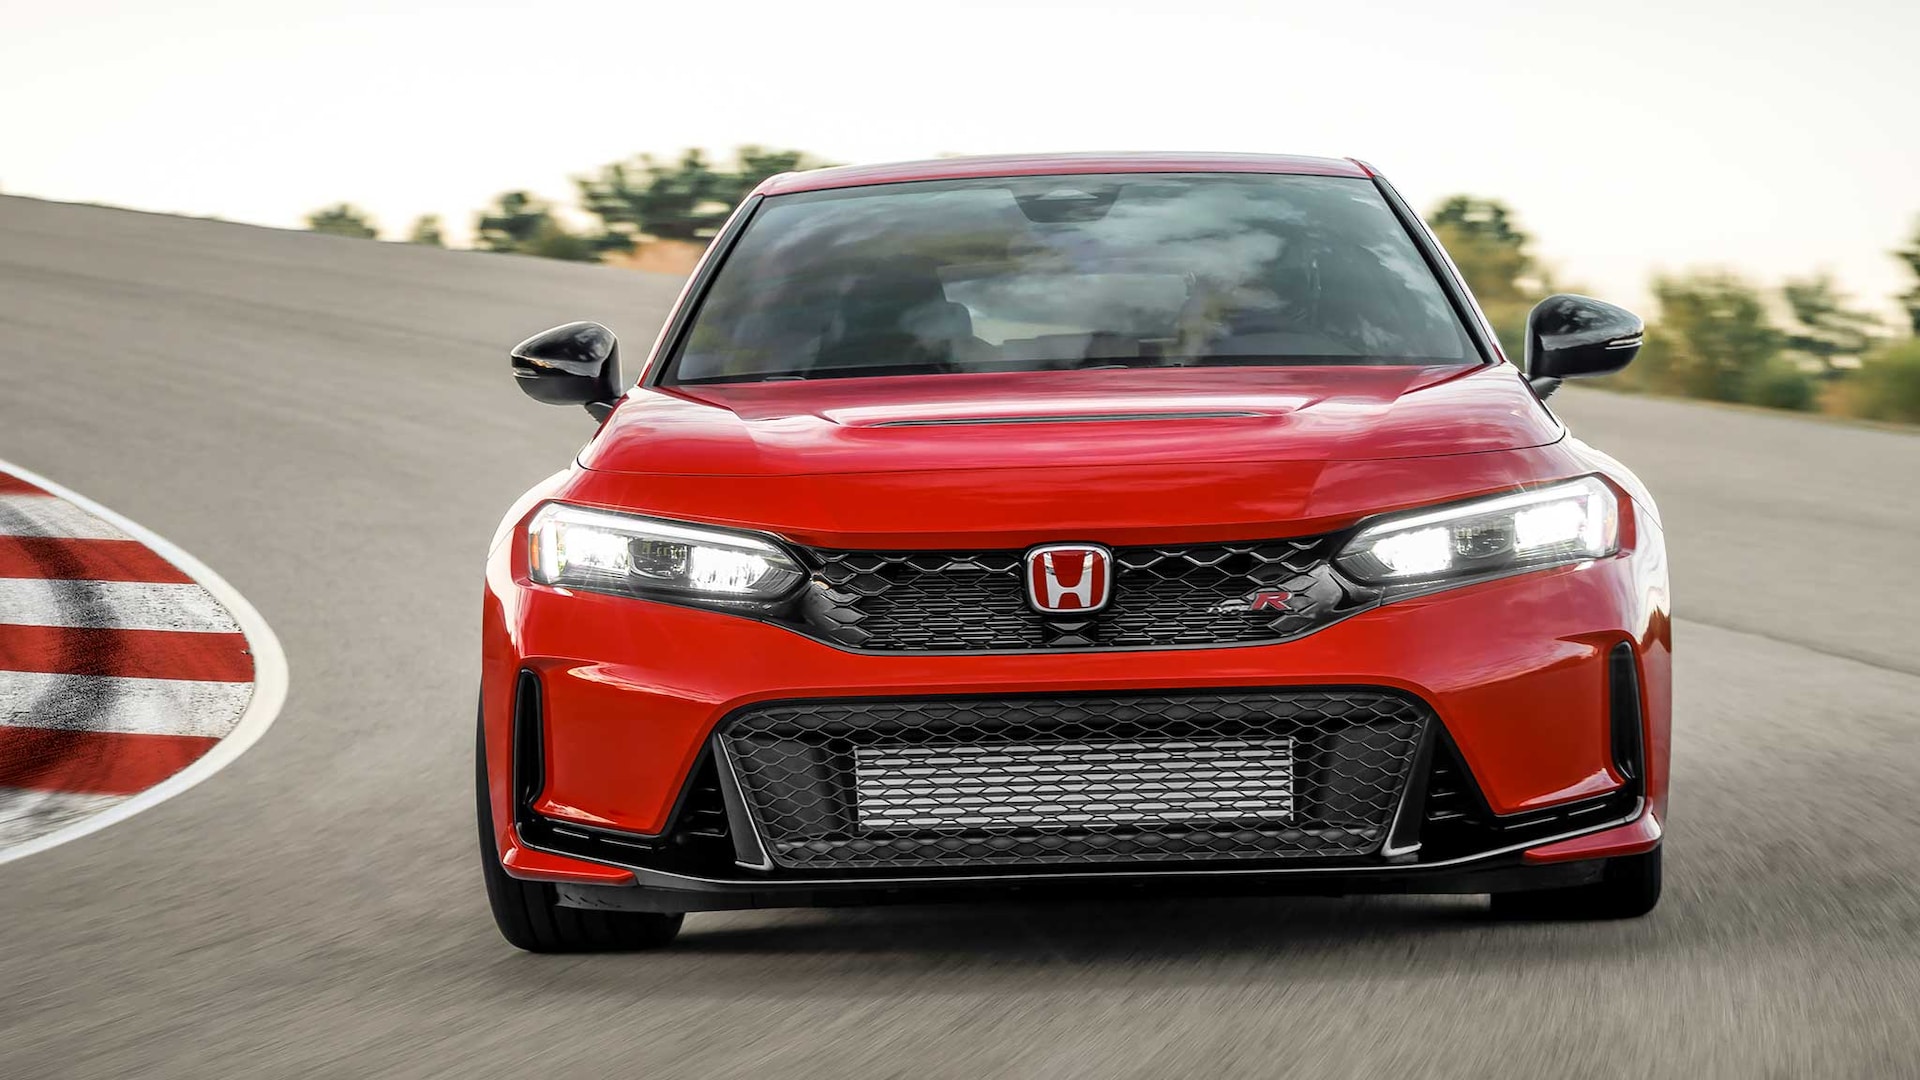 Honda Upgrades Civic Type R for IndyCar Pace Car Duty